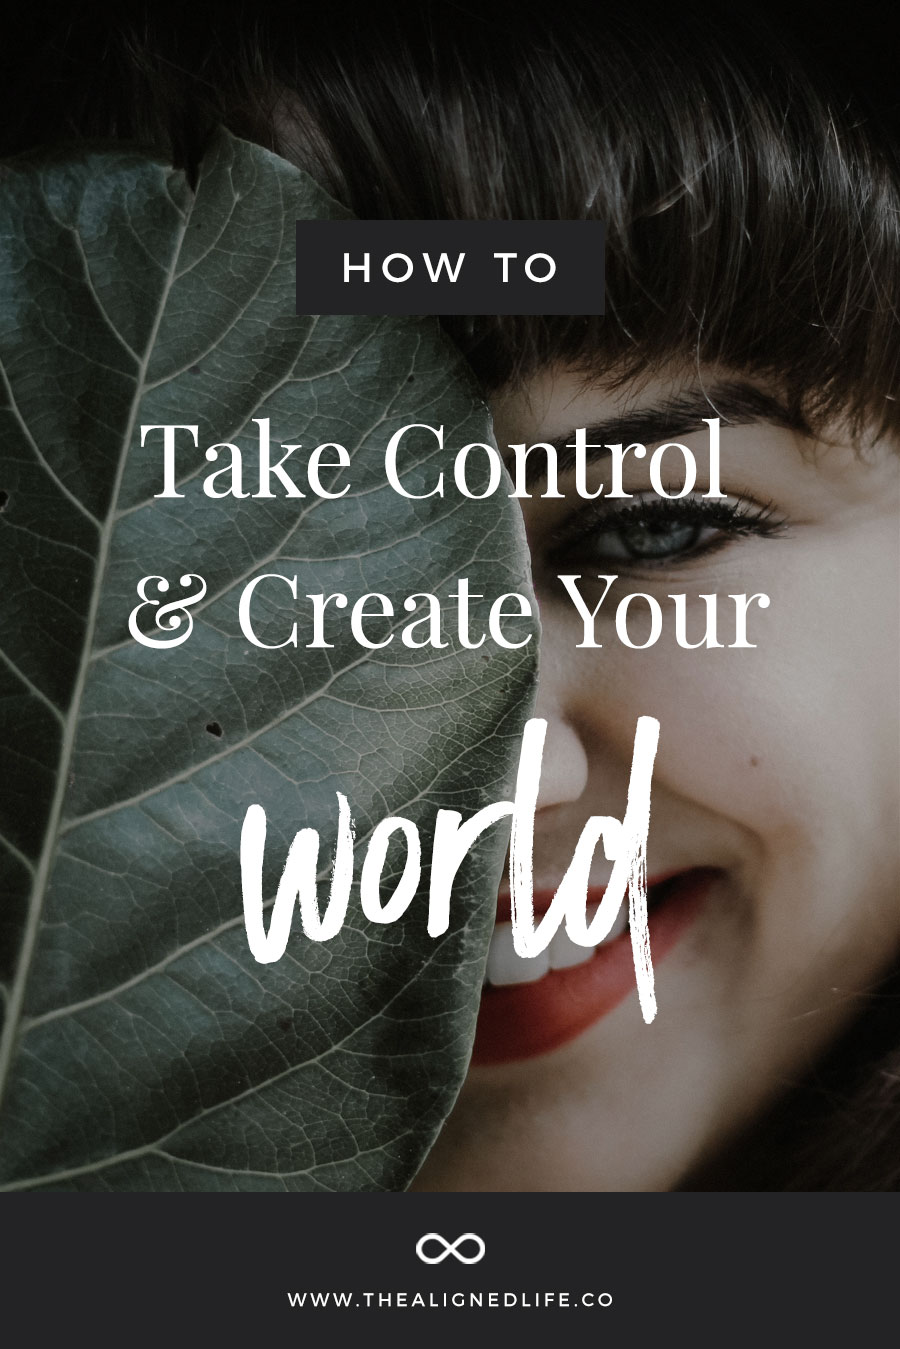 How To Take Control & Create Your World